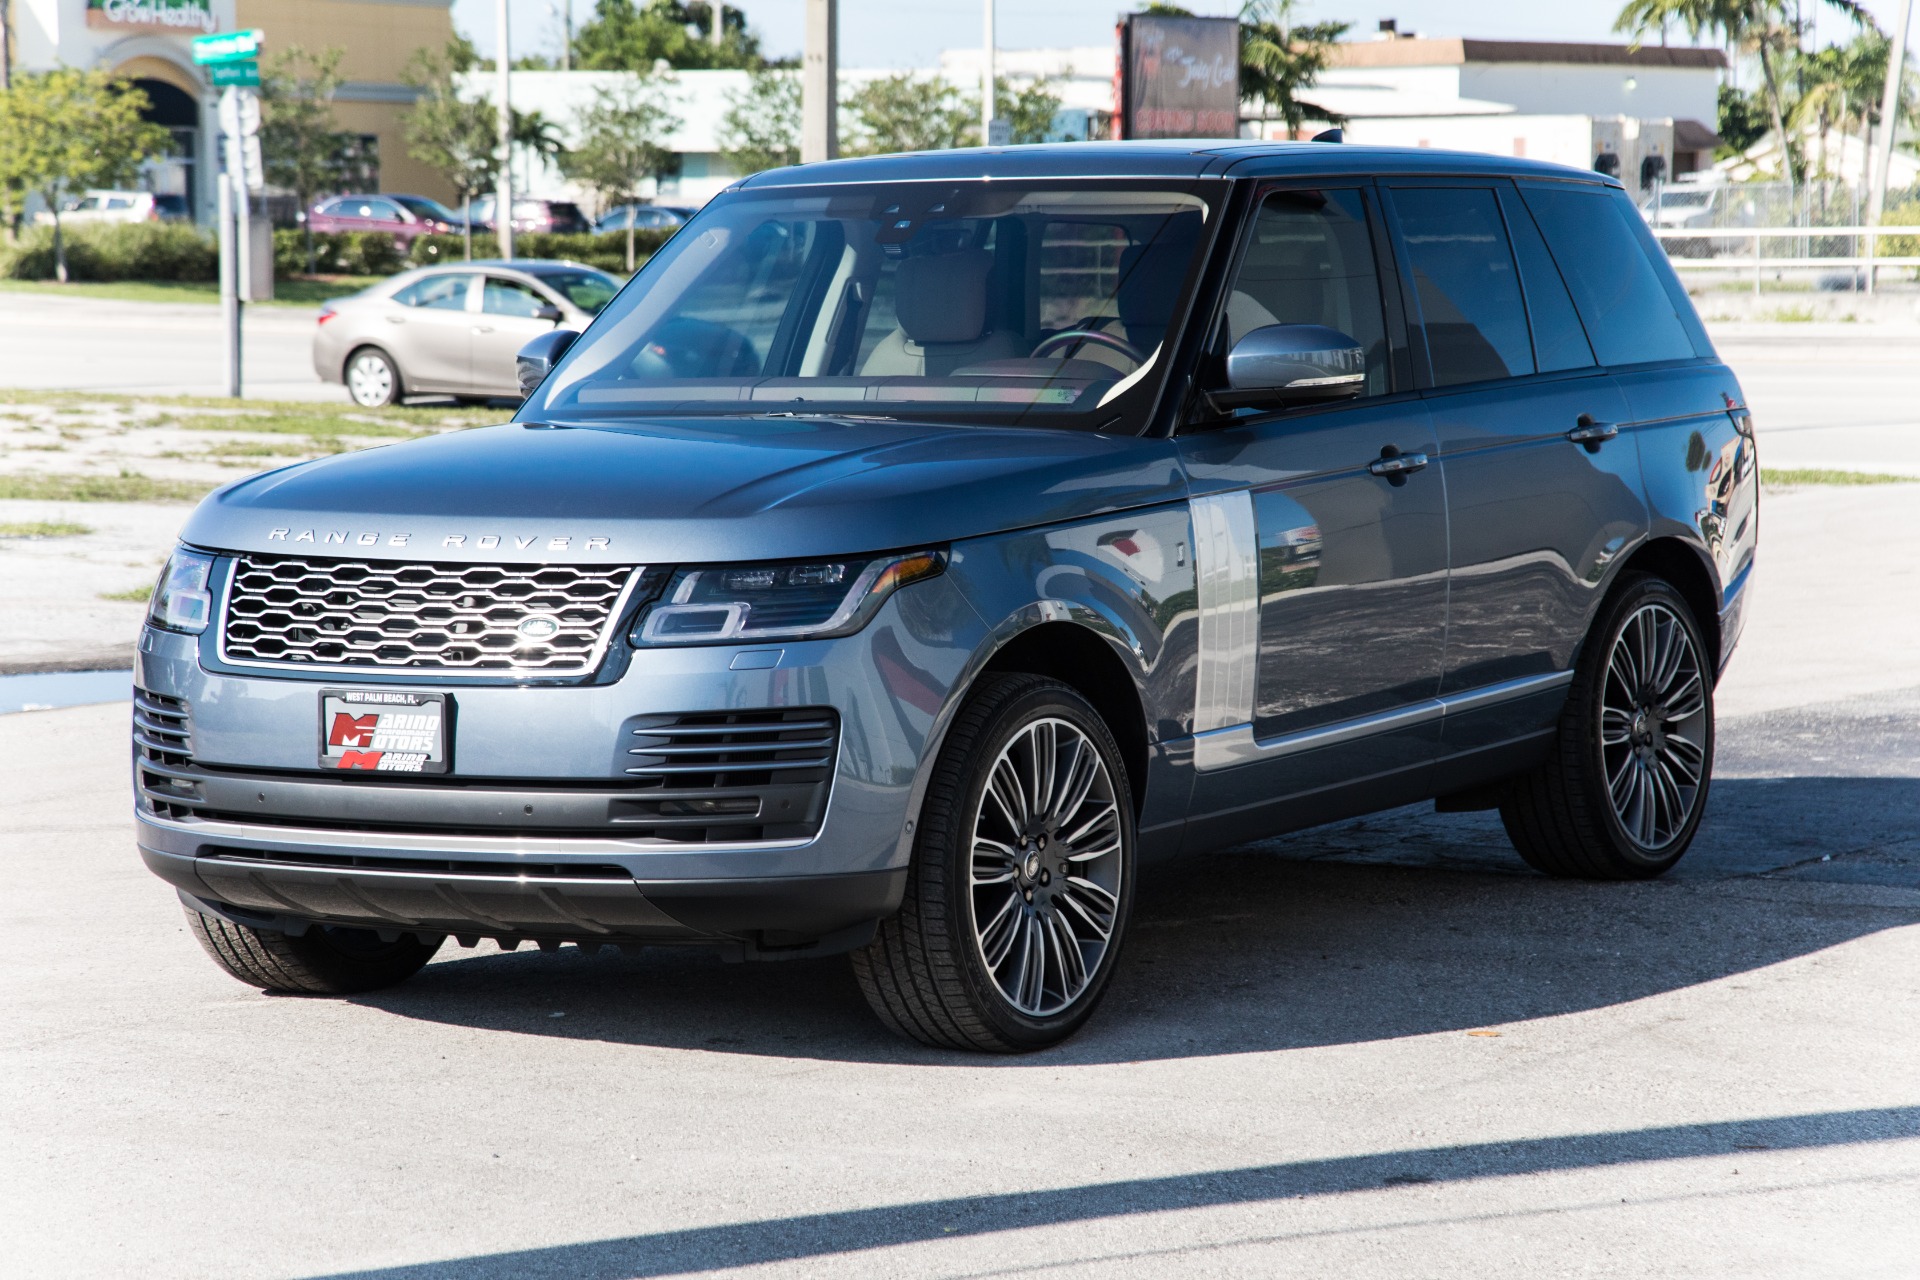 2018 Range Rover Supercharged - www.inf-inet.com